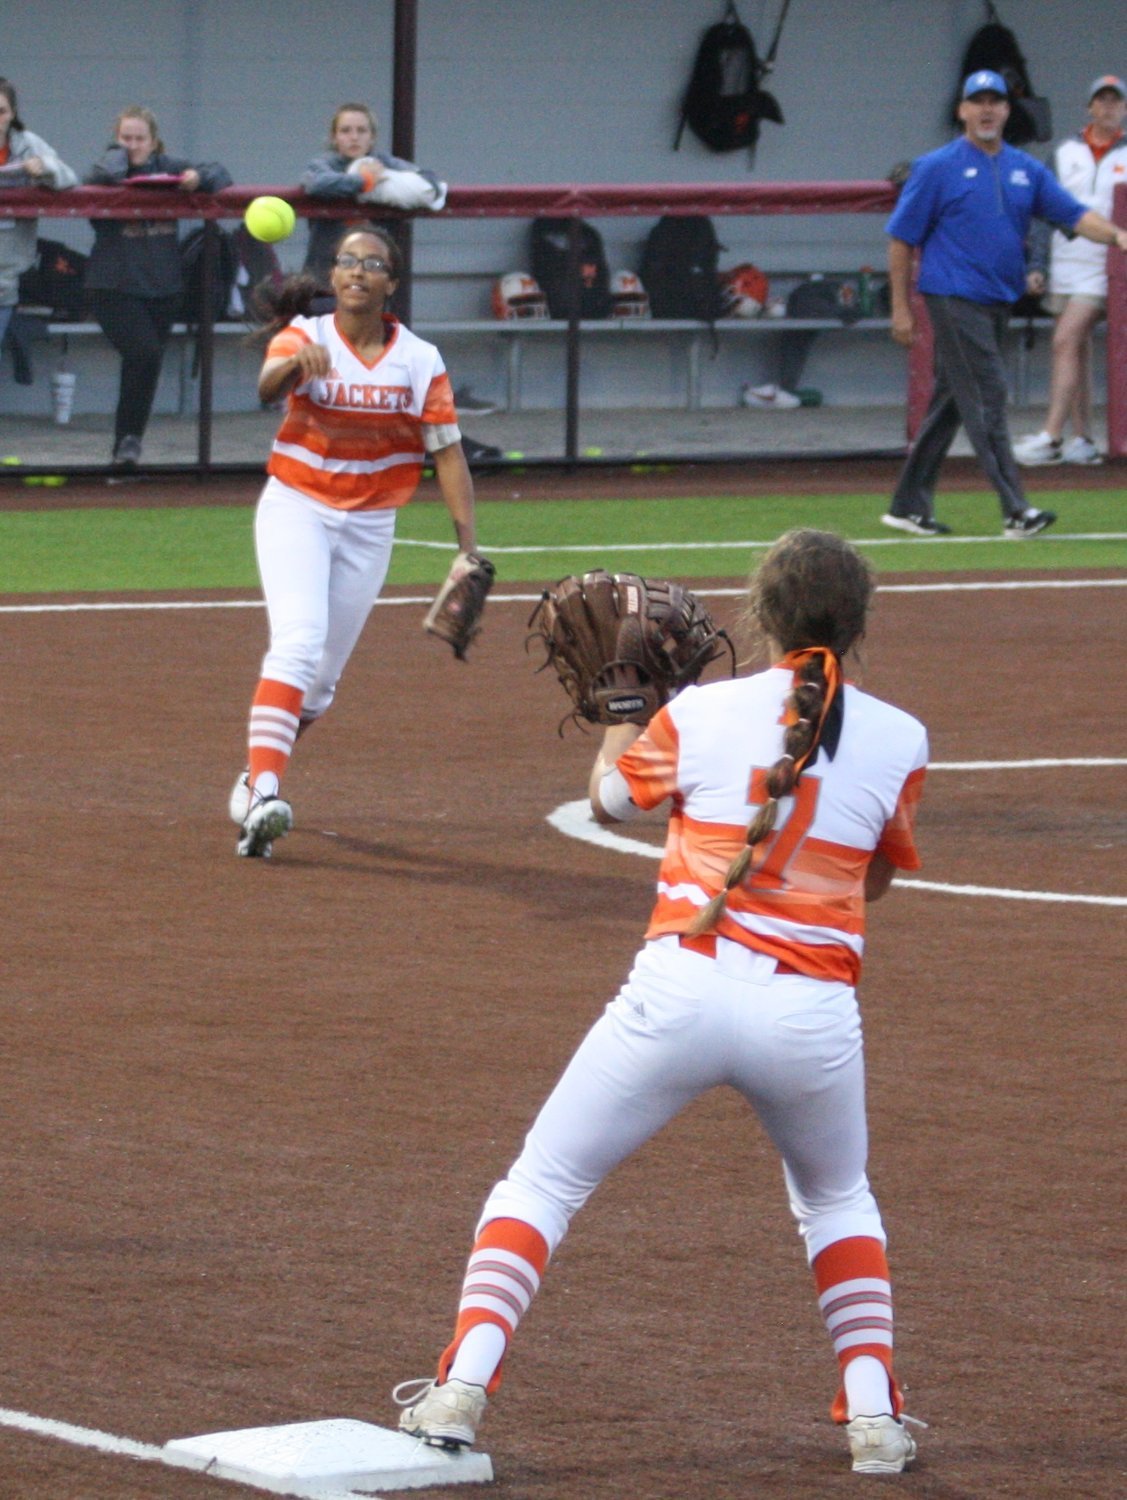 Kaitlyn Burrell and Breanna Wilmoth team up to record the first out of the sixth inning.